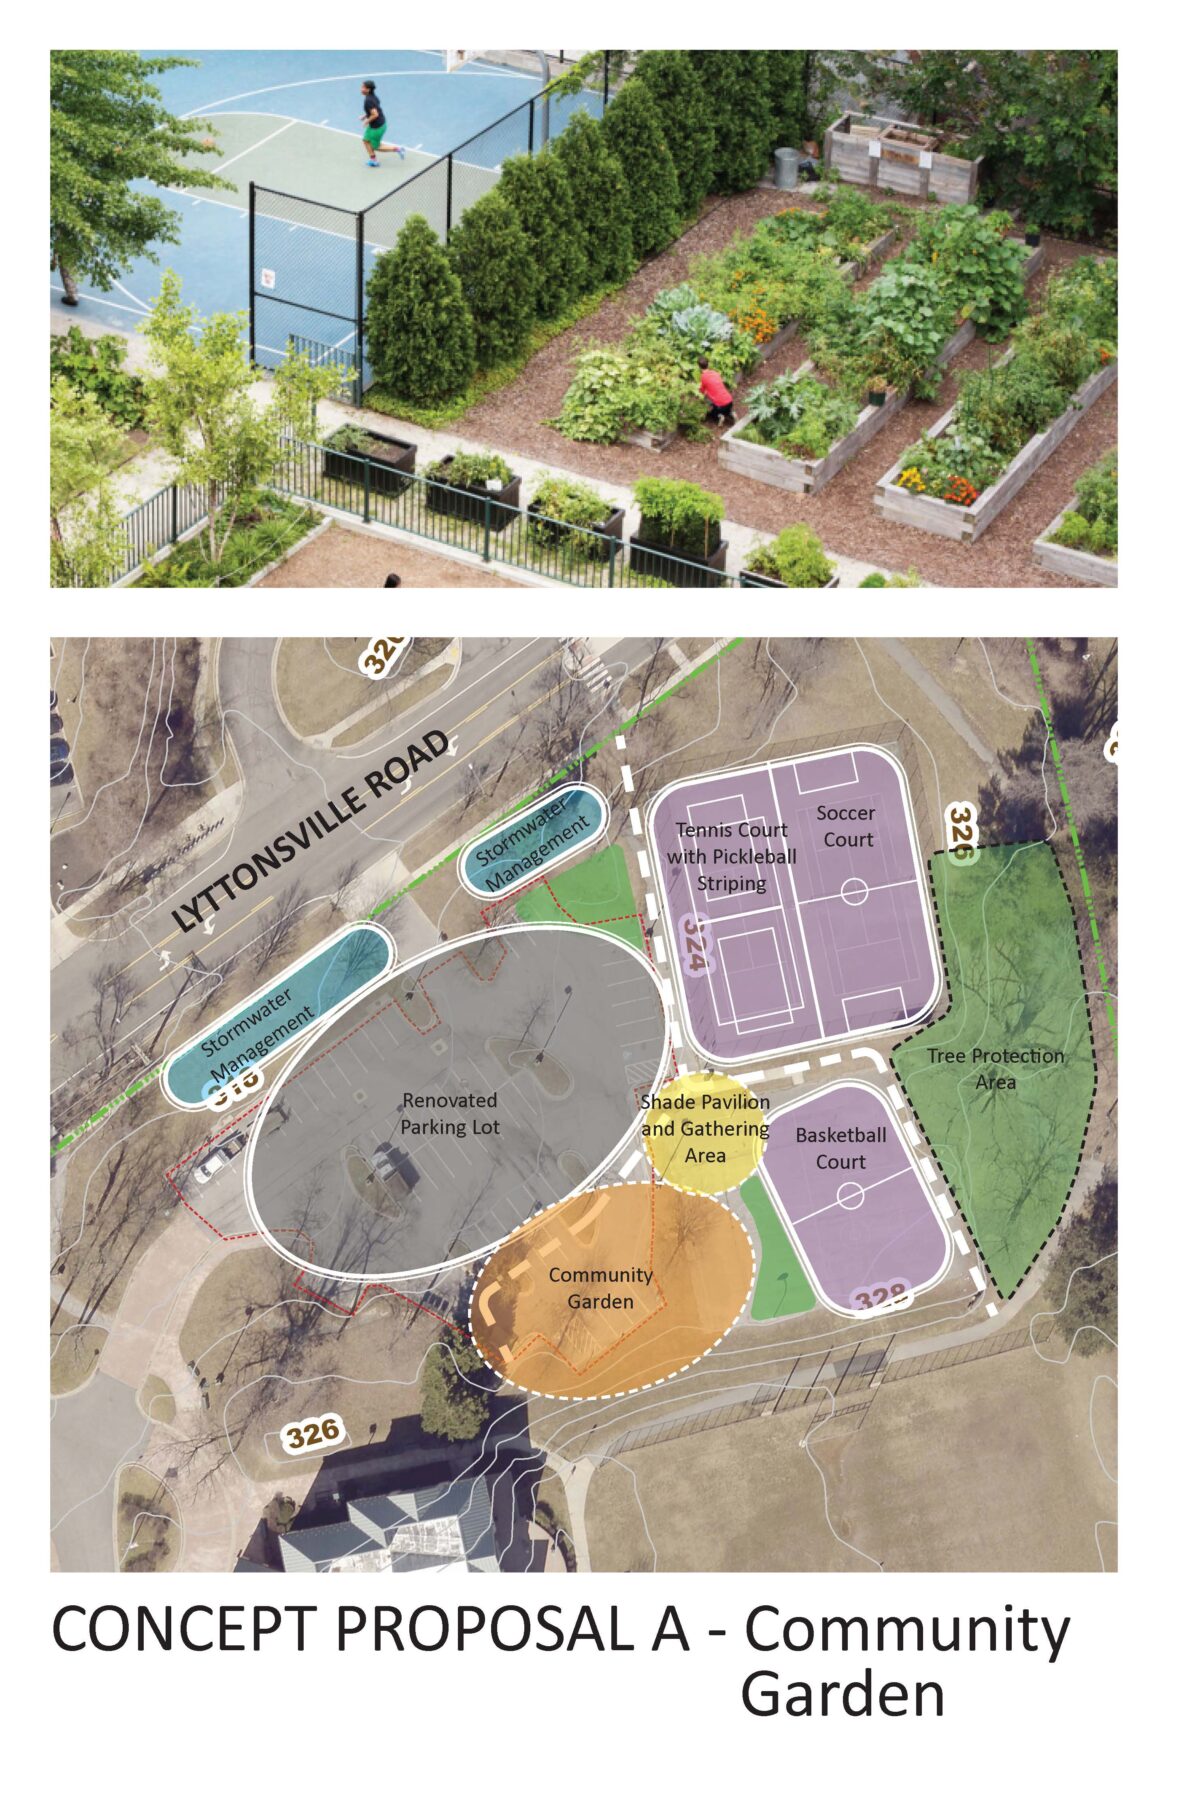 Image of a community garden. Image of a map of Rosemary Hills - Lyttonsville Local Park with locations of new amenities such as a community garden, shade pavilion, and updated courts